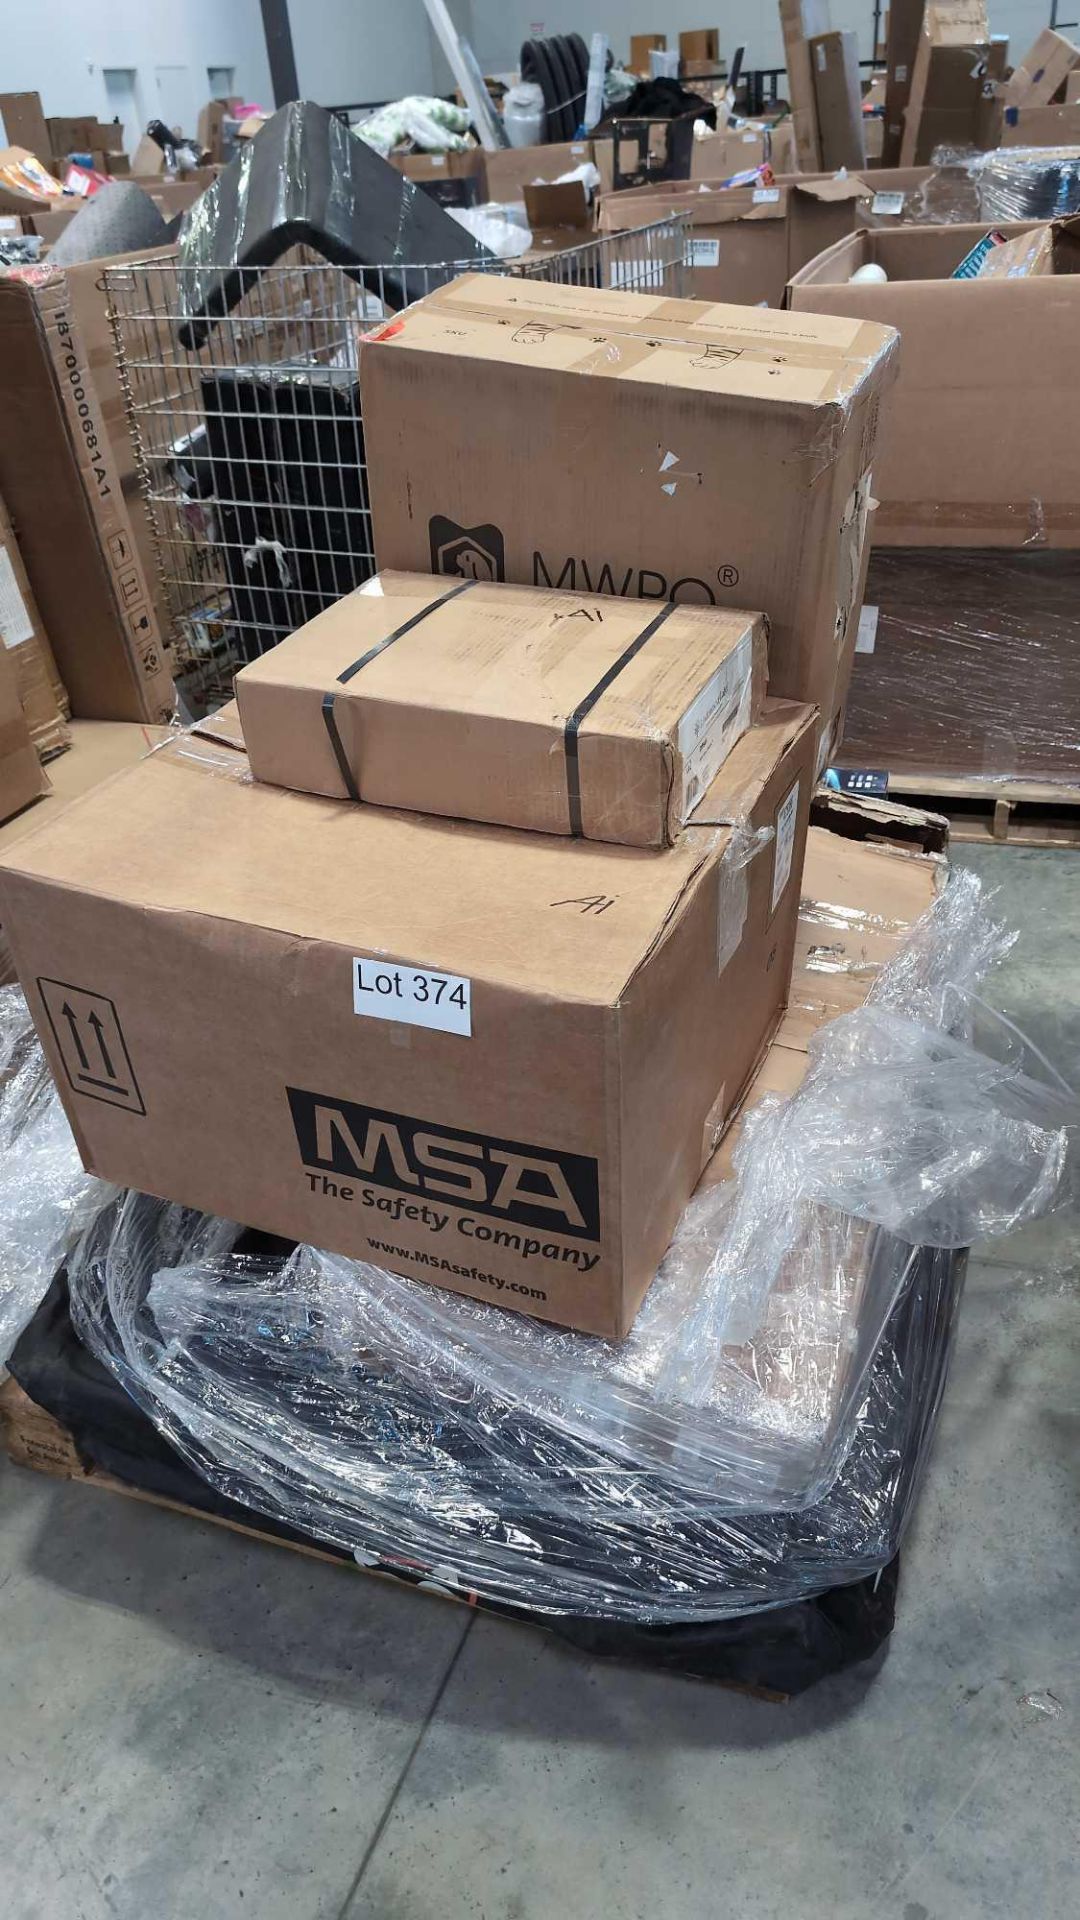 MSA Hard Hats, righline gear, pet supplies and more - Image 9 of 9